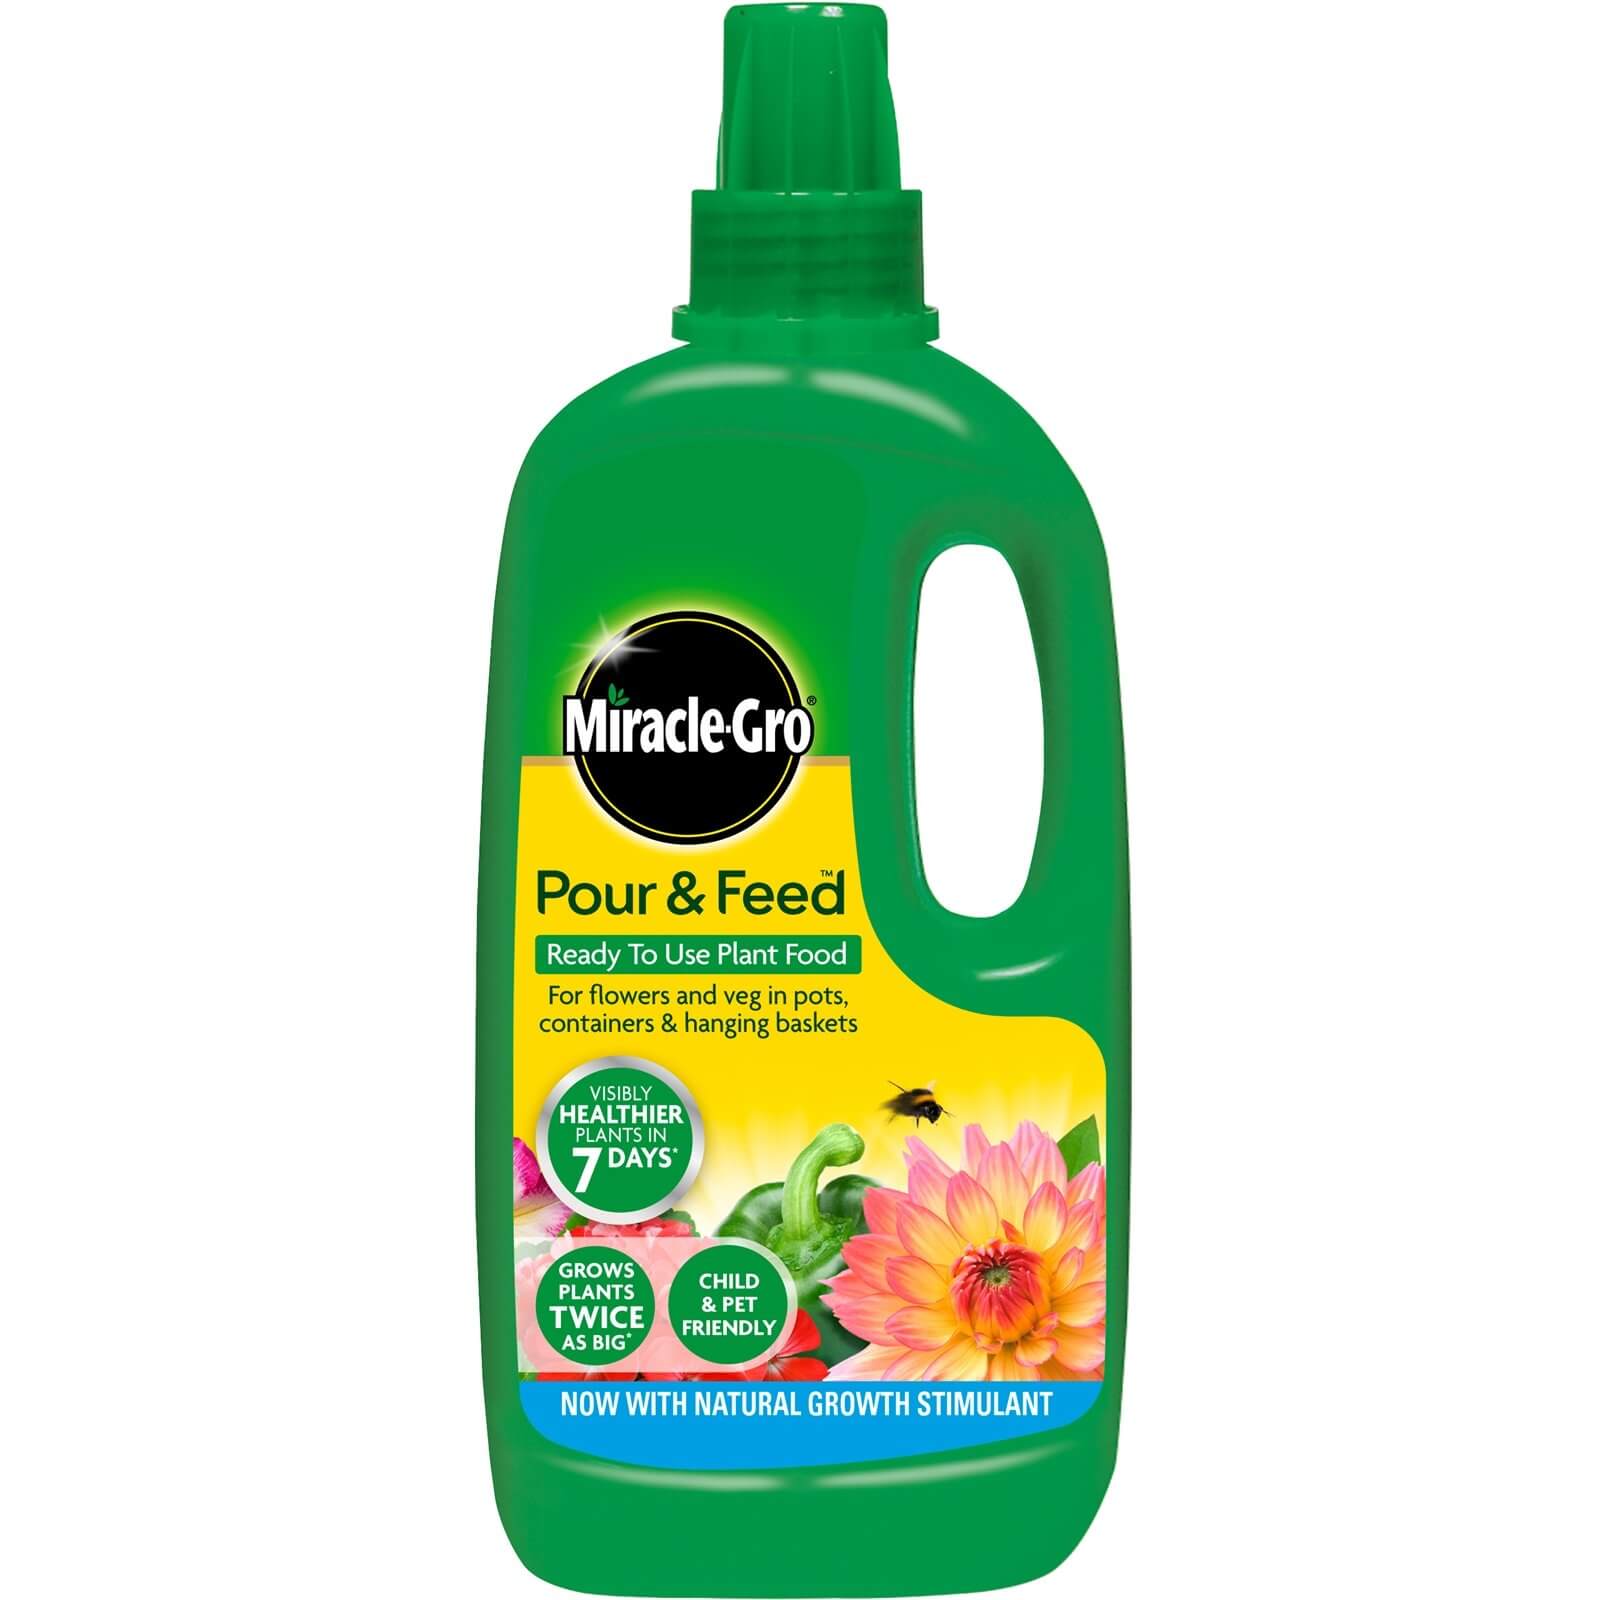 Photo of Miracle-gro Pour & Feed Ready To Use Plant Food - 1l